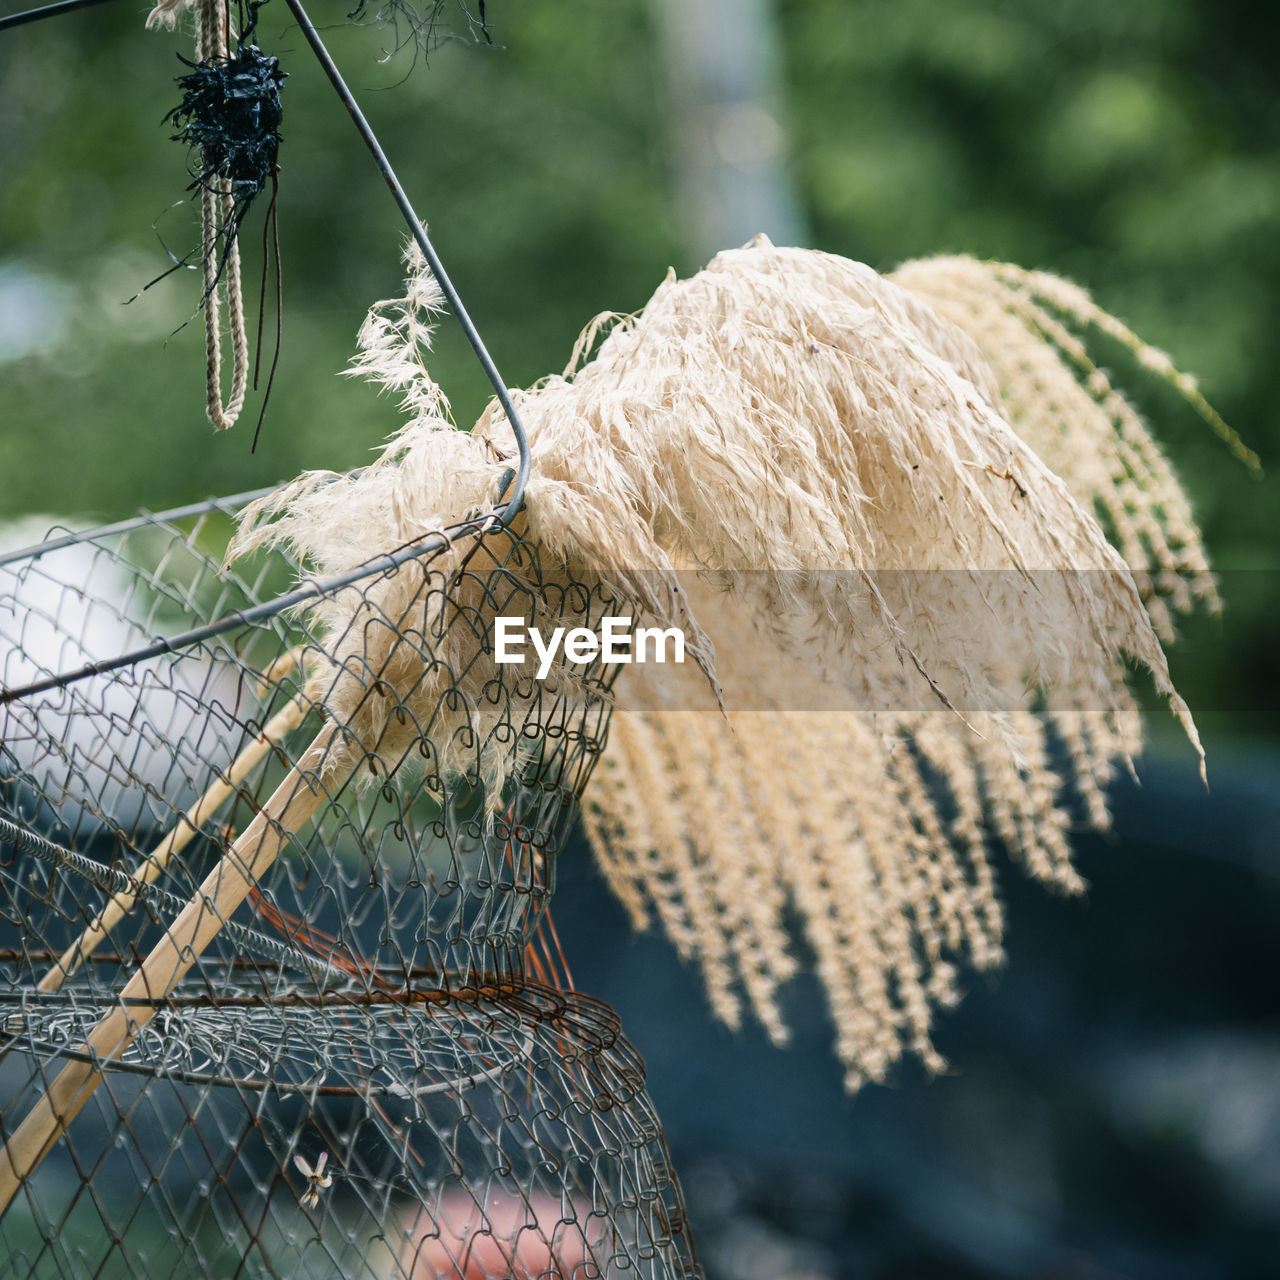 CLOSE-UP OF FISHING NET AGAINST PLANTS